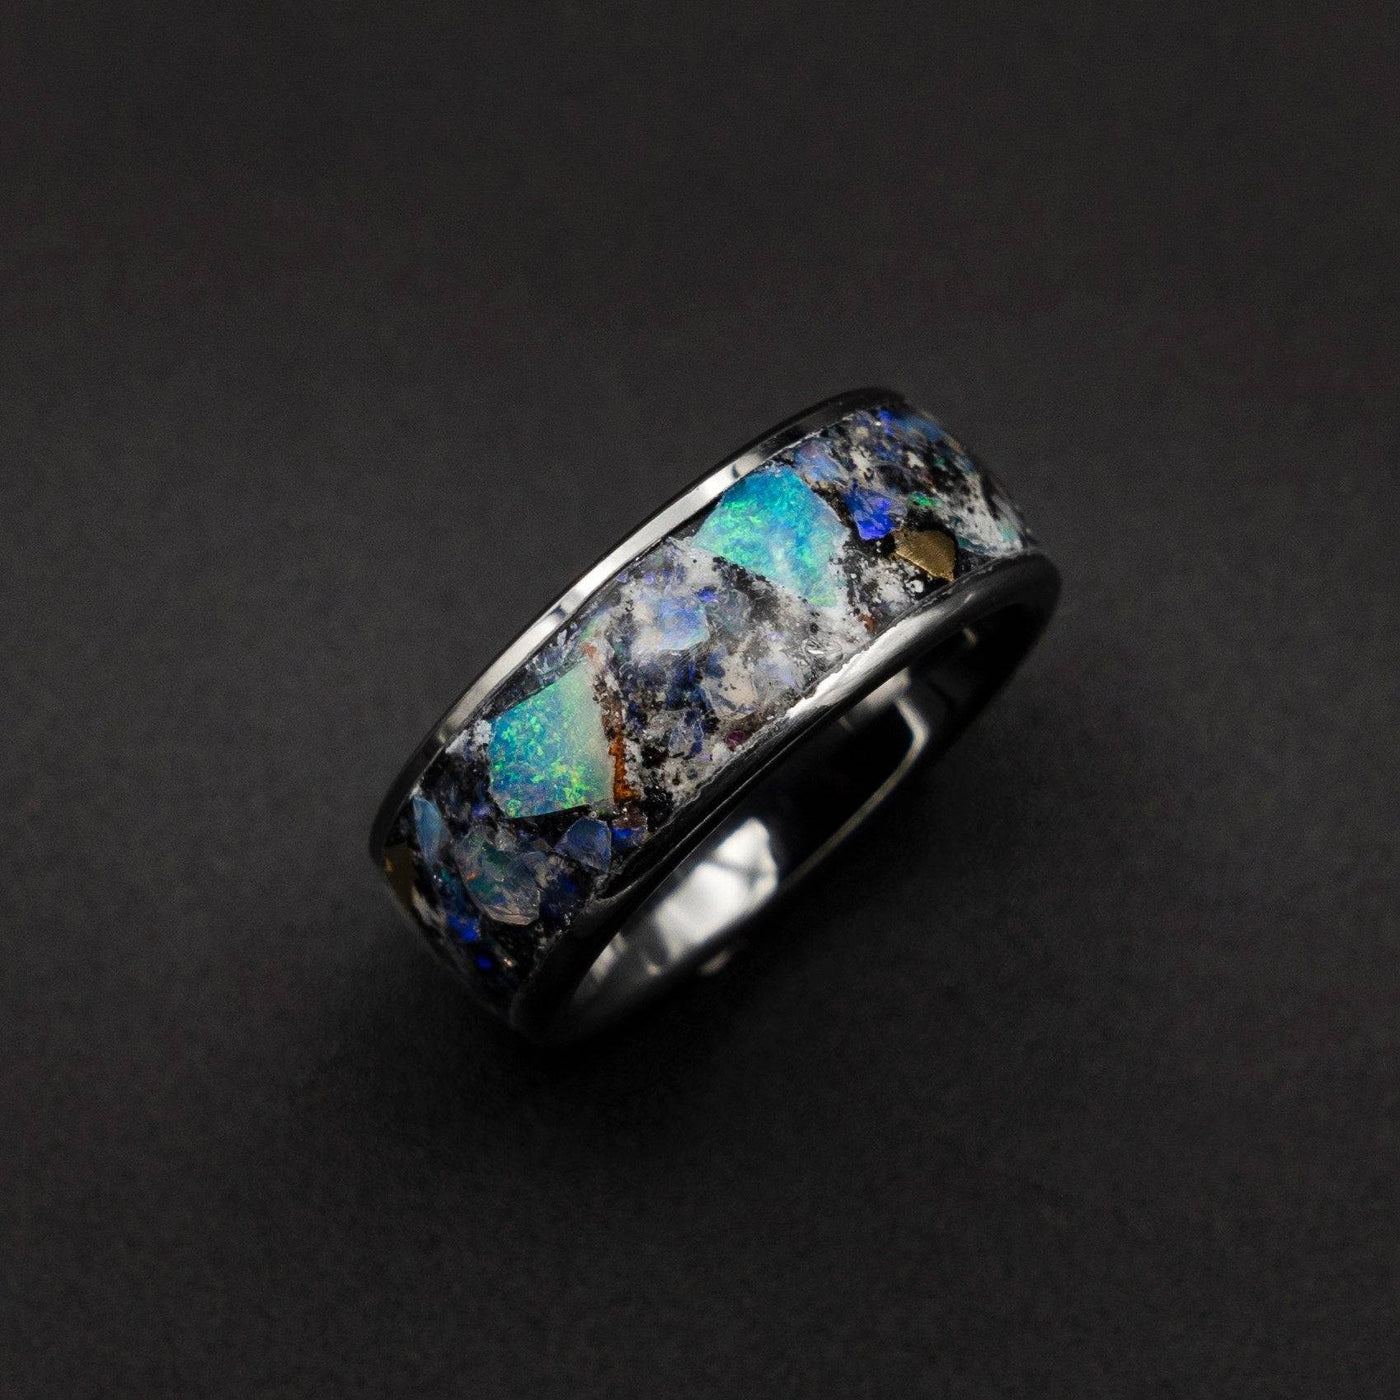 Genuine Australian opal ring with glowstone and meteorite dust